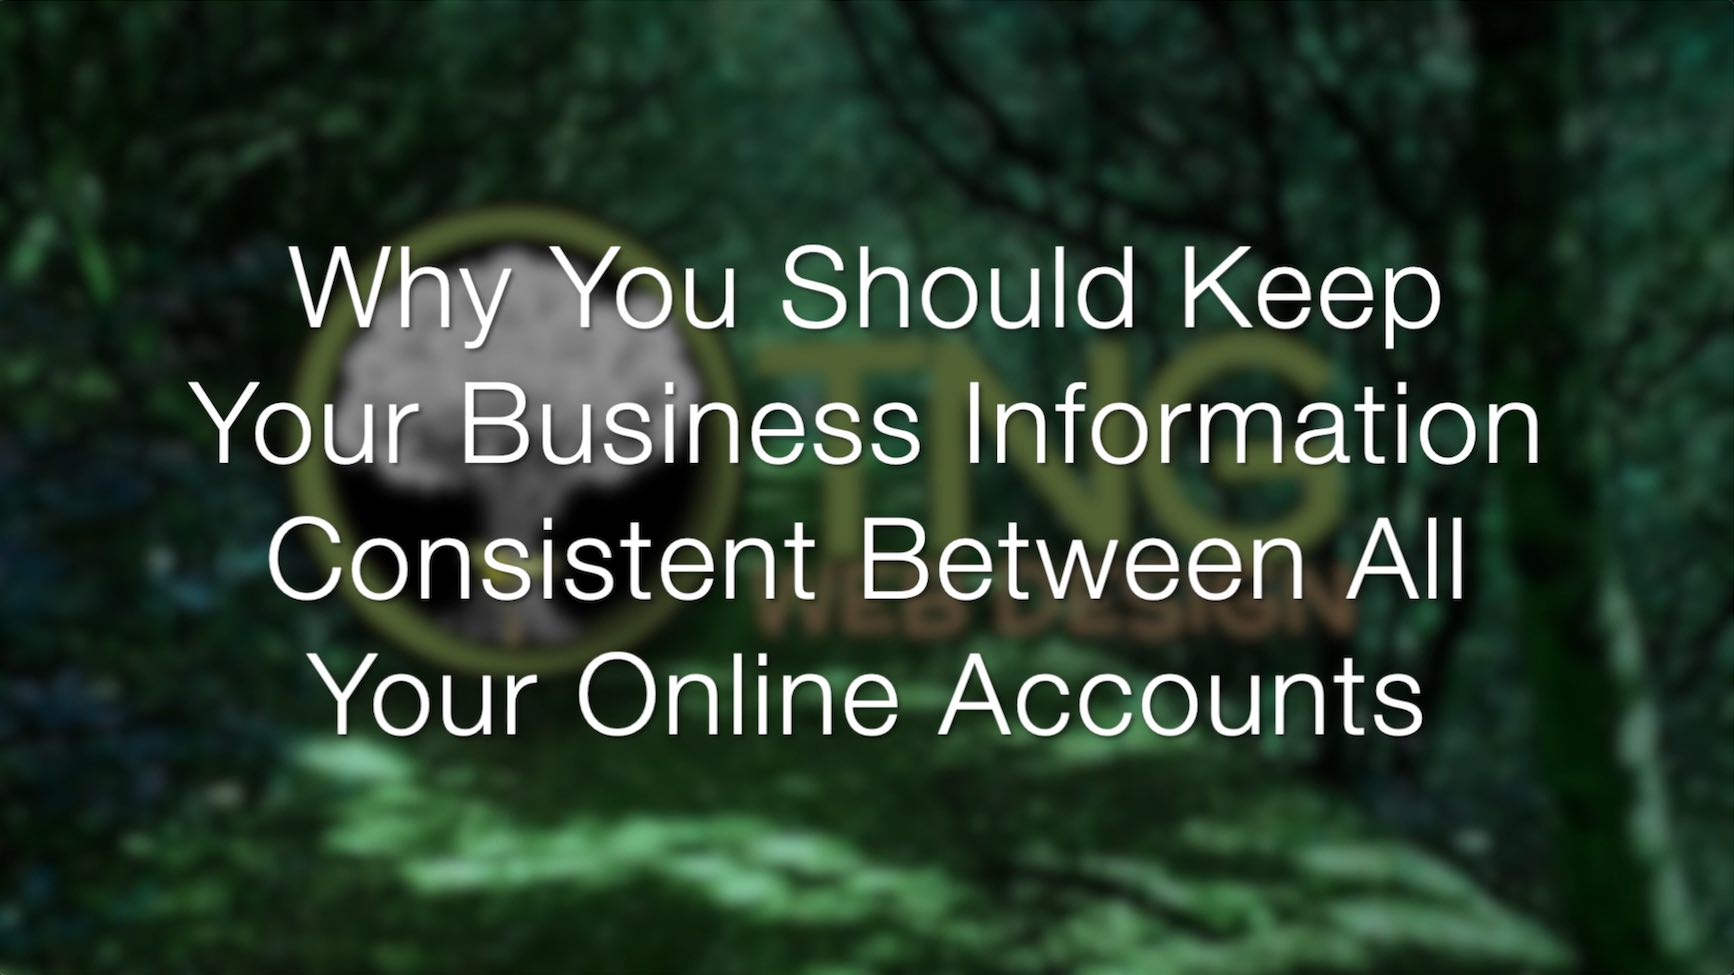 Featured image for “Why You Should Keep Your Business Information Consistent Between All Your Online Accounts”